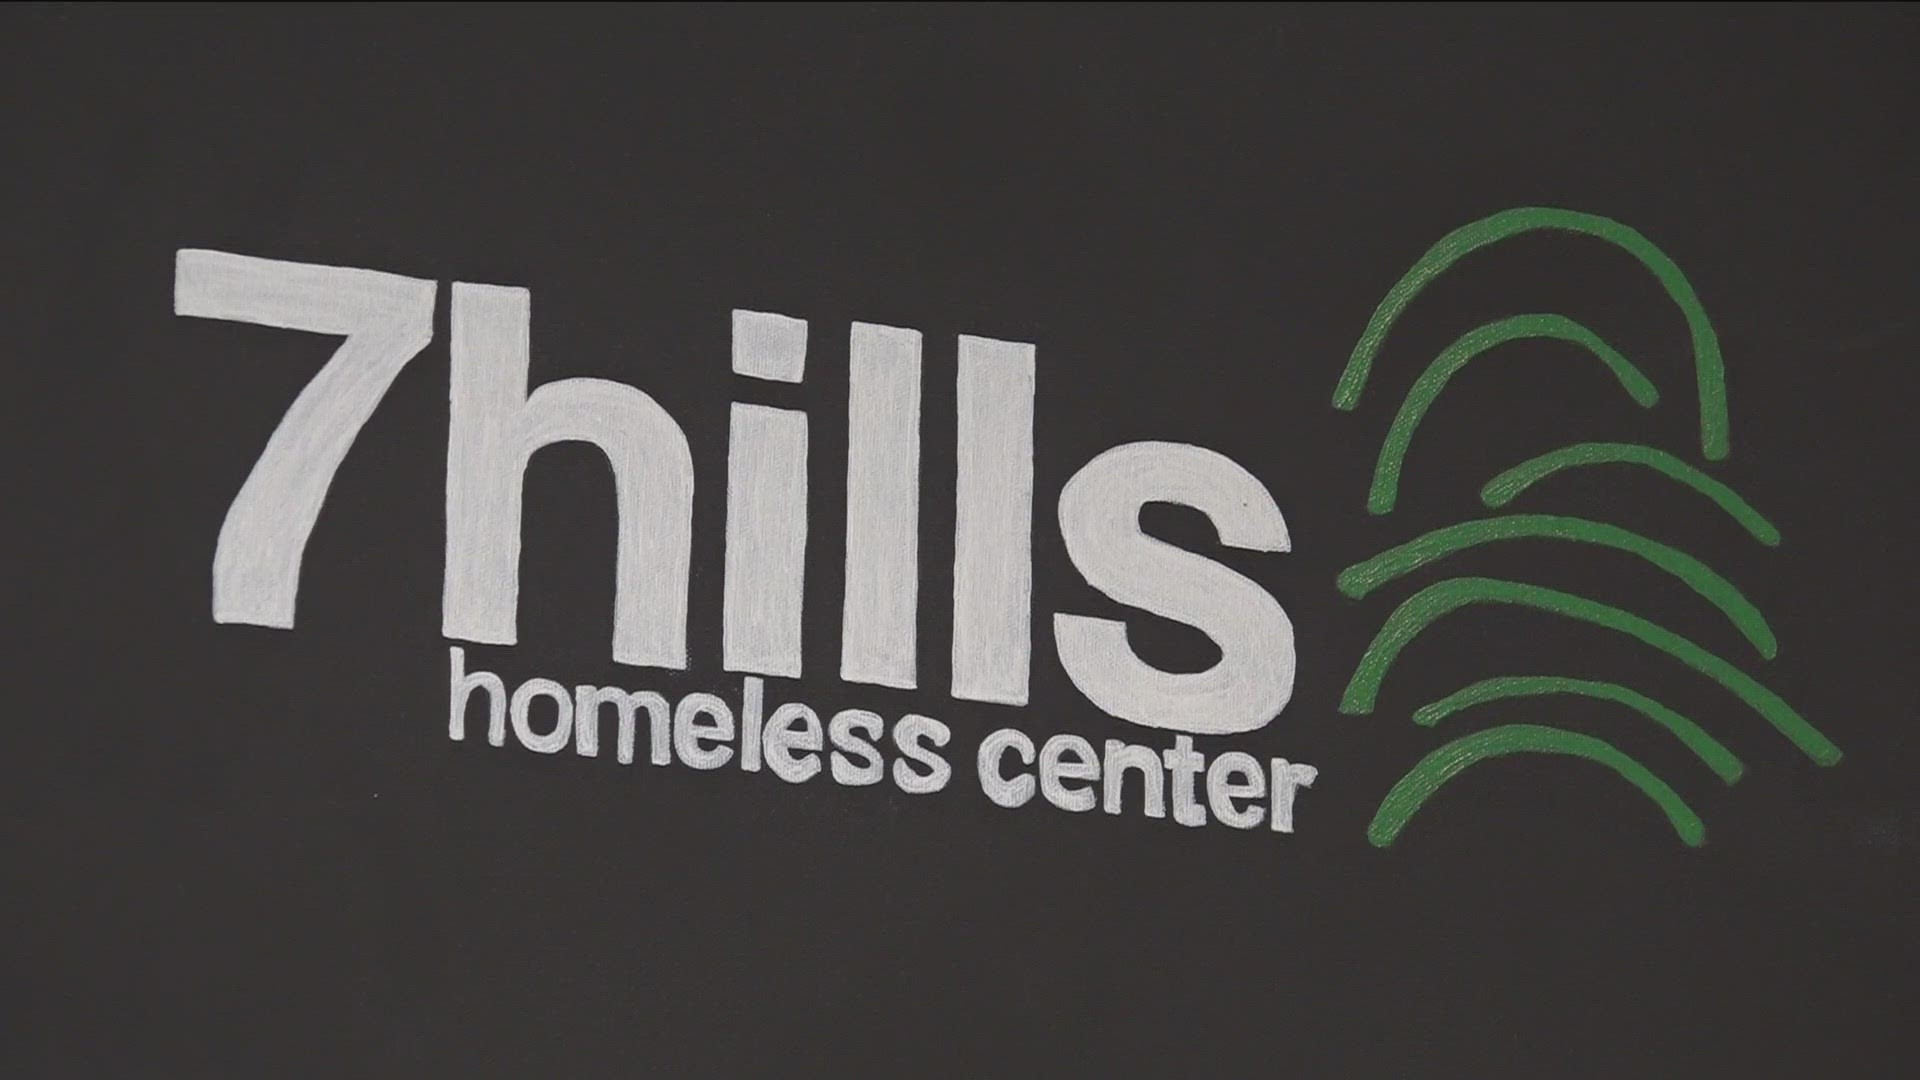 Founded in 2001, 7hills started as a day center and offers re-housing services for the unhoused community.